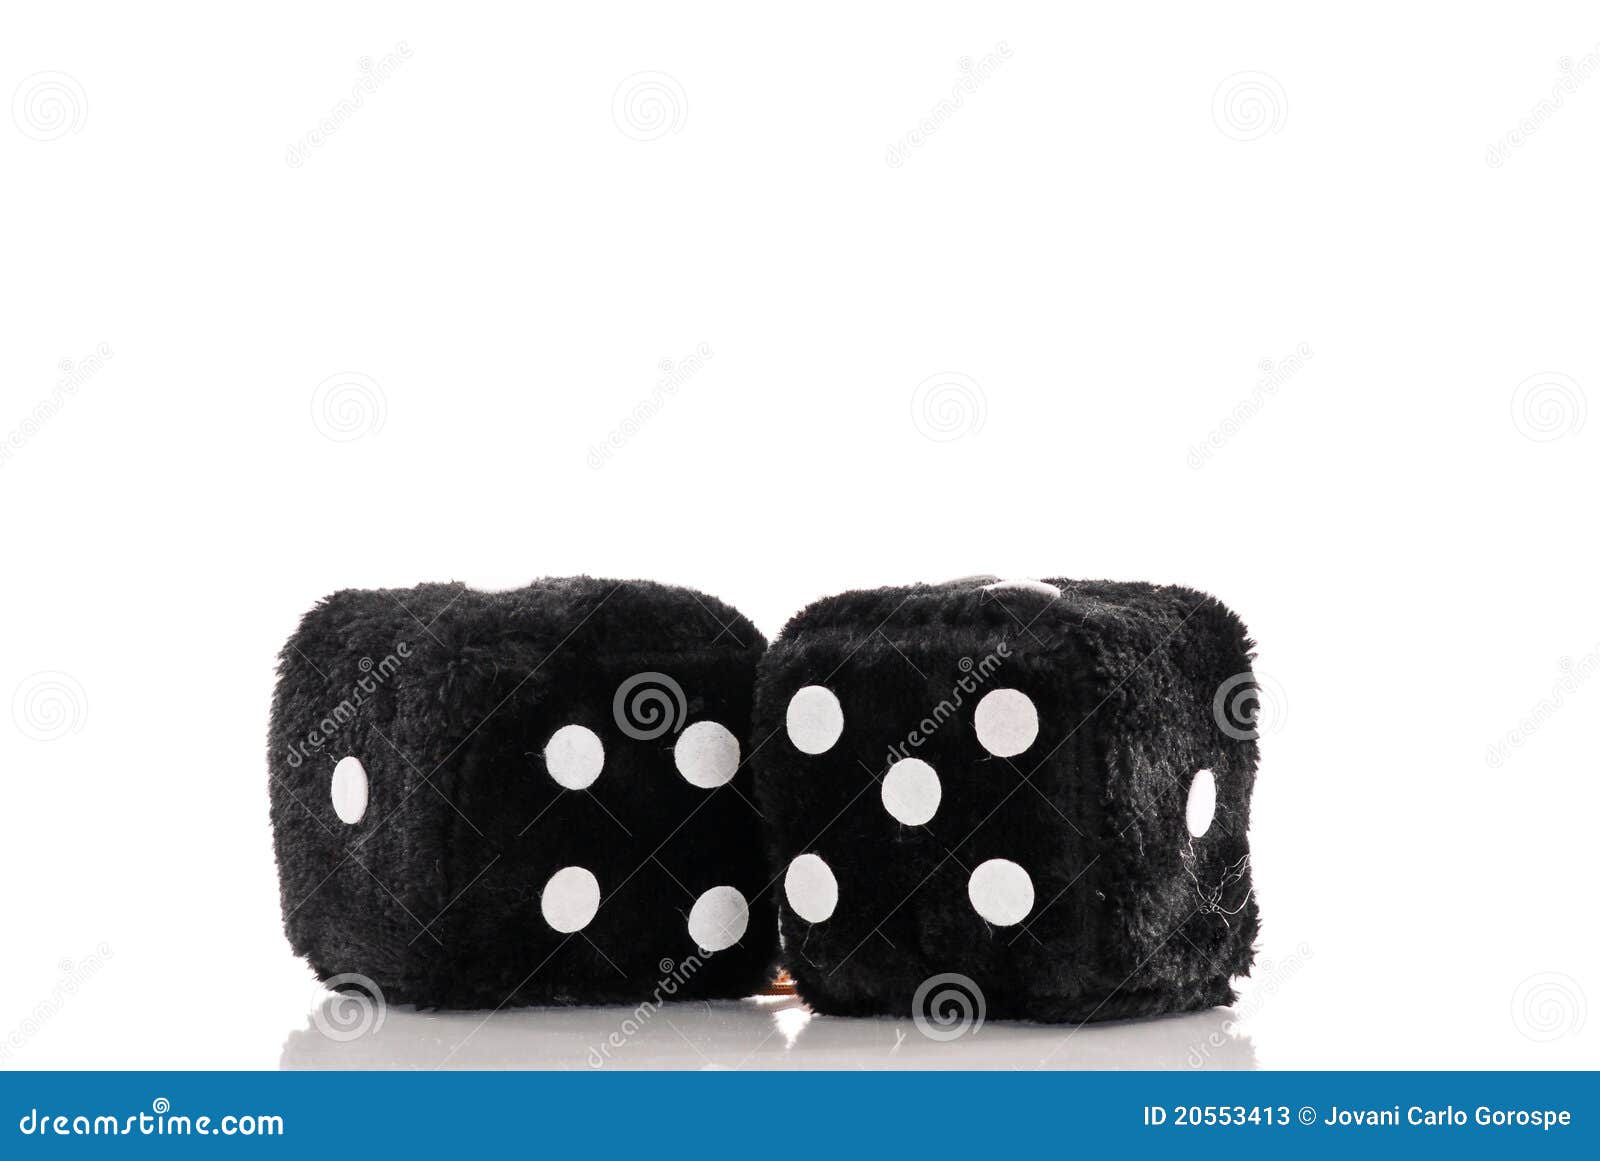 31 Car Fluffy Dice Royalty-Free Photos and Stock Images